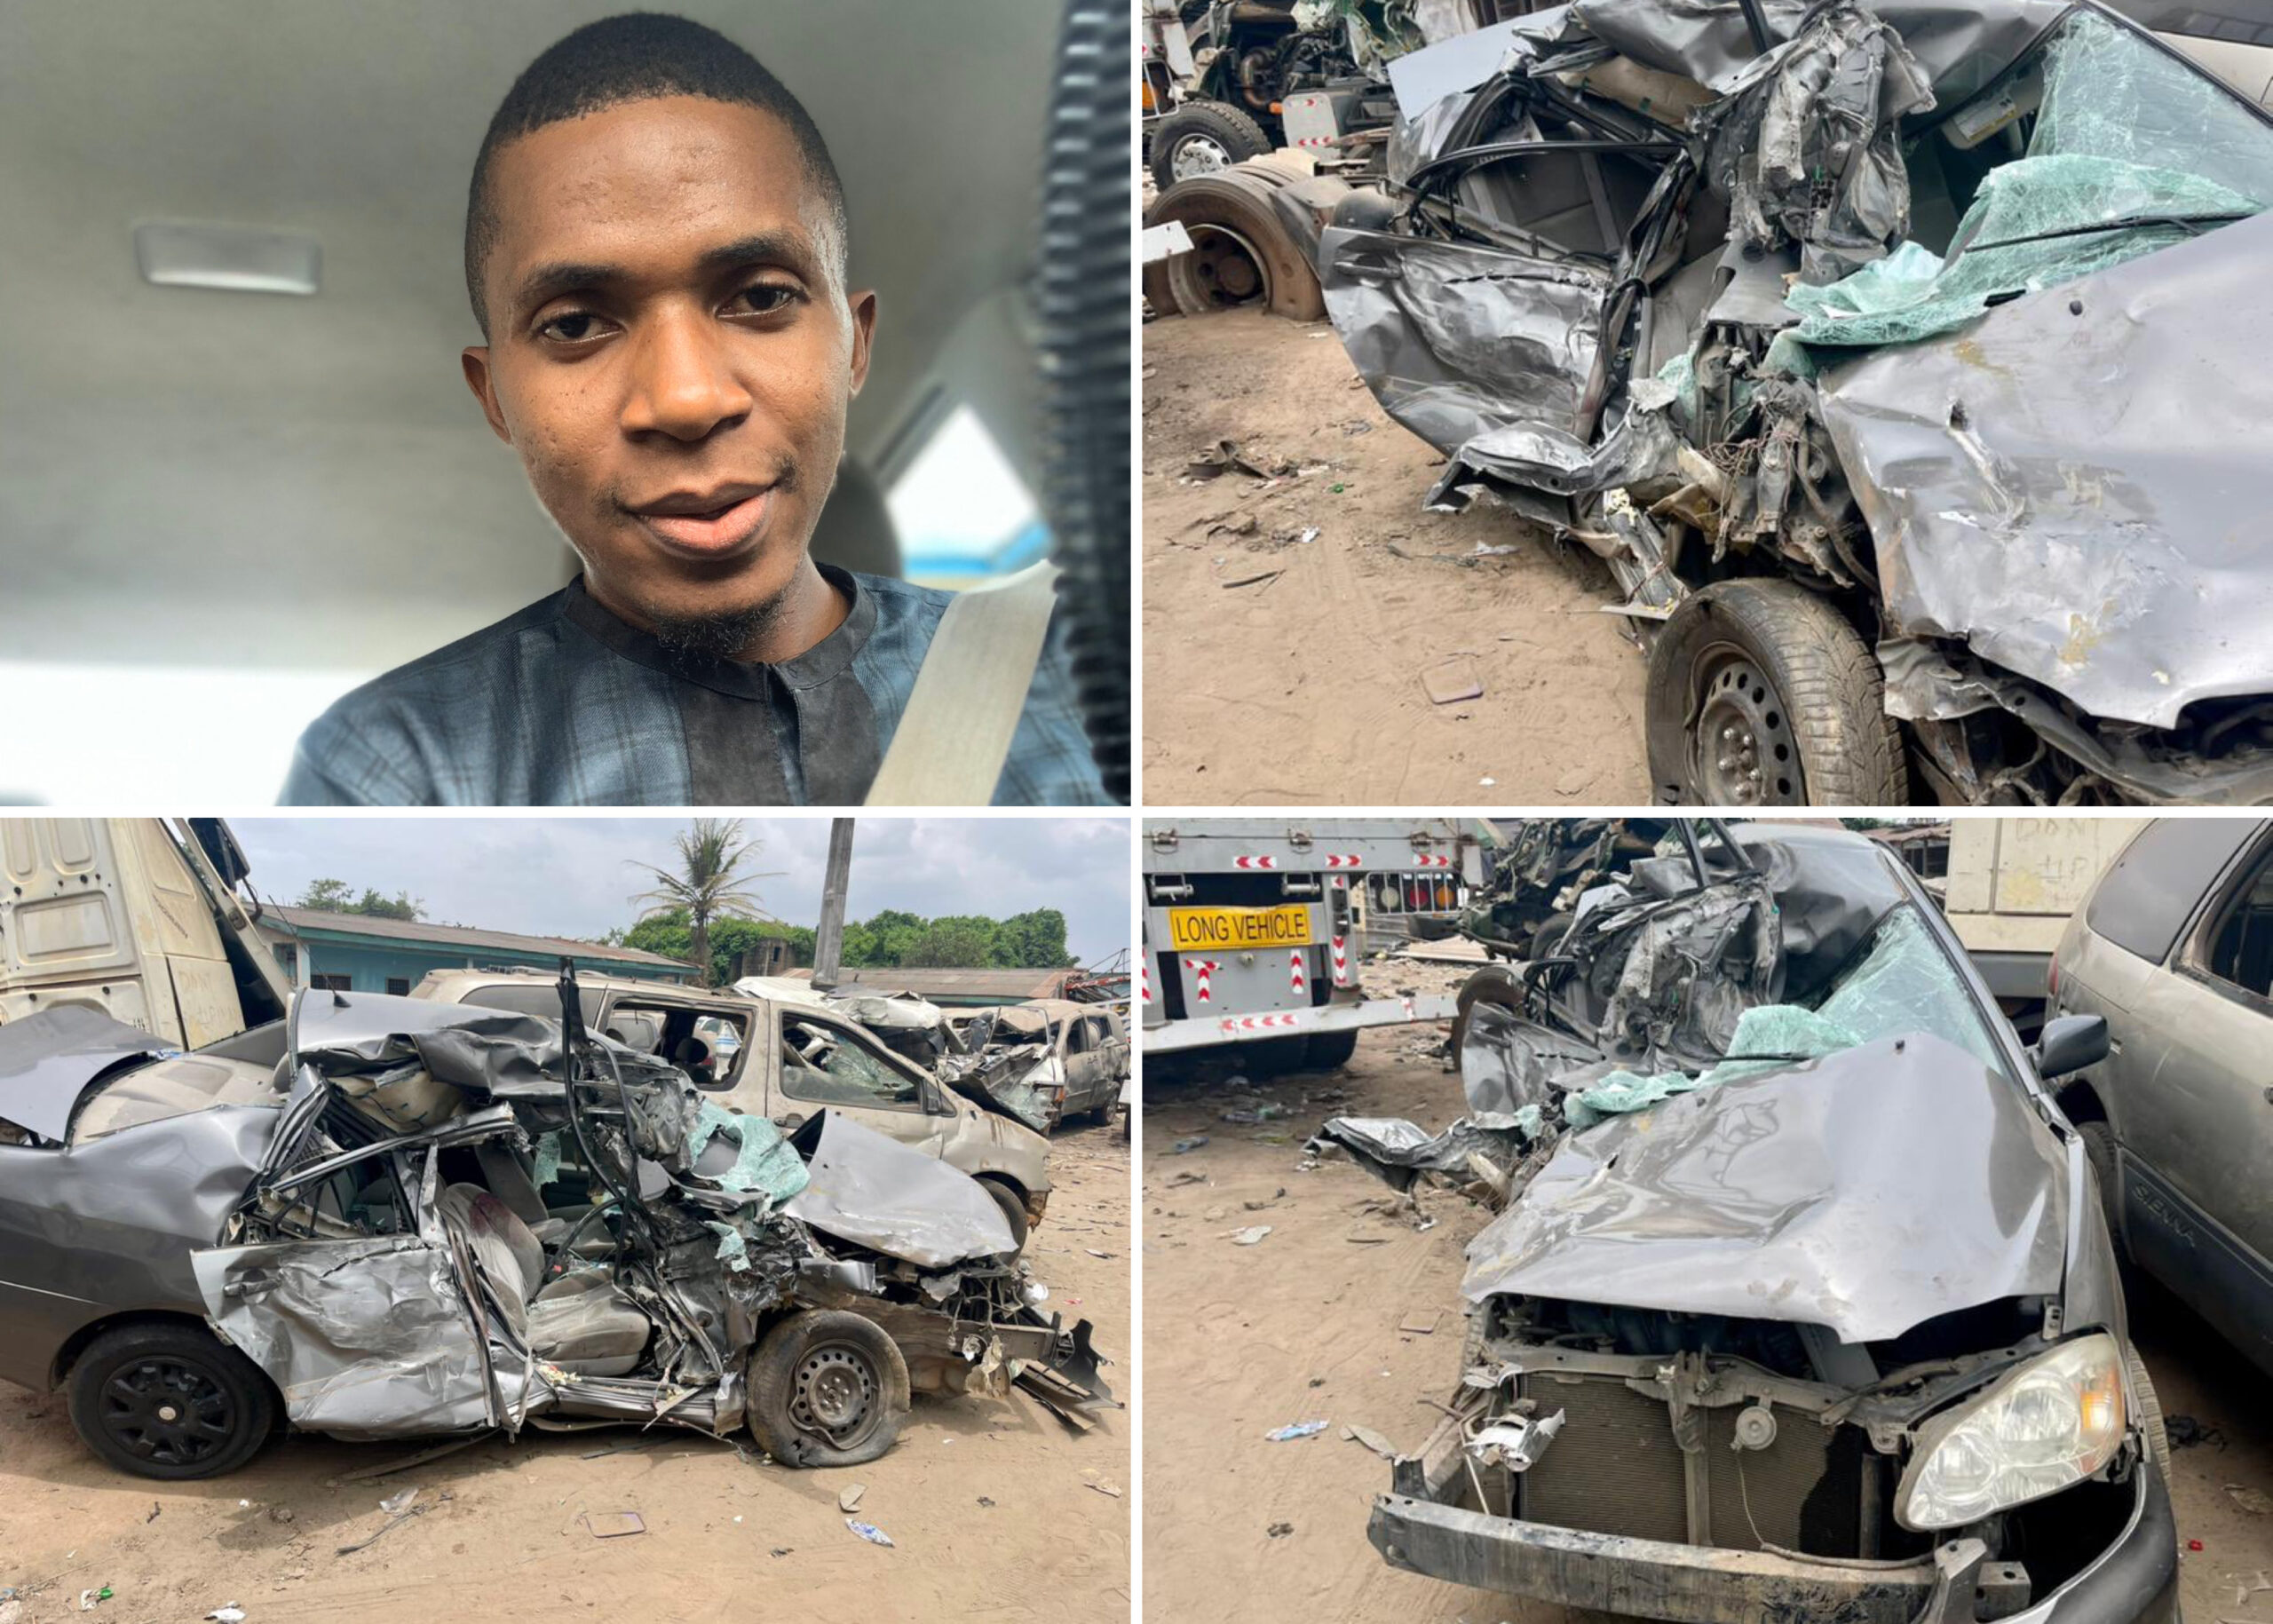 ‘Nigeria Failed Me’ - Man Writes After Losing Fiancee In Fatal Accident